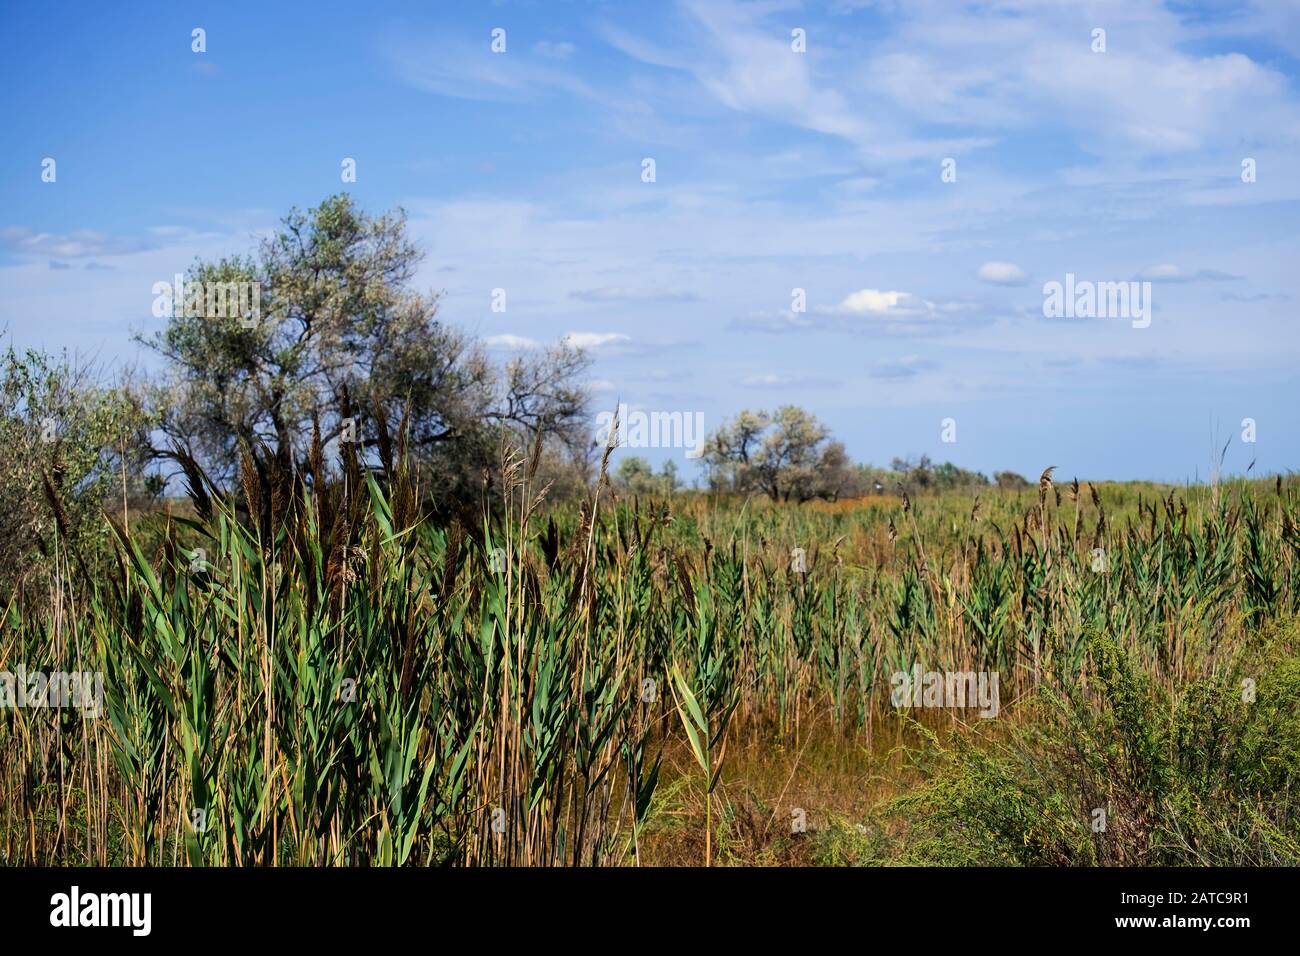 Wetlands in the area Maliy Sasik Lake. Sedge and haze of clouds on a blue sky Stock Photo